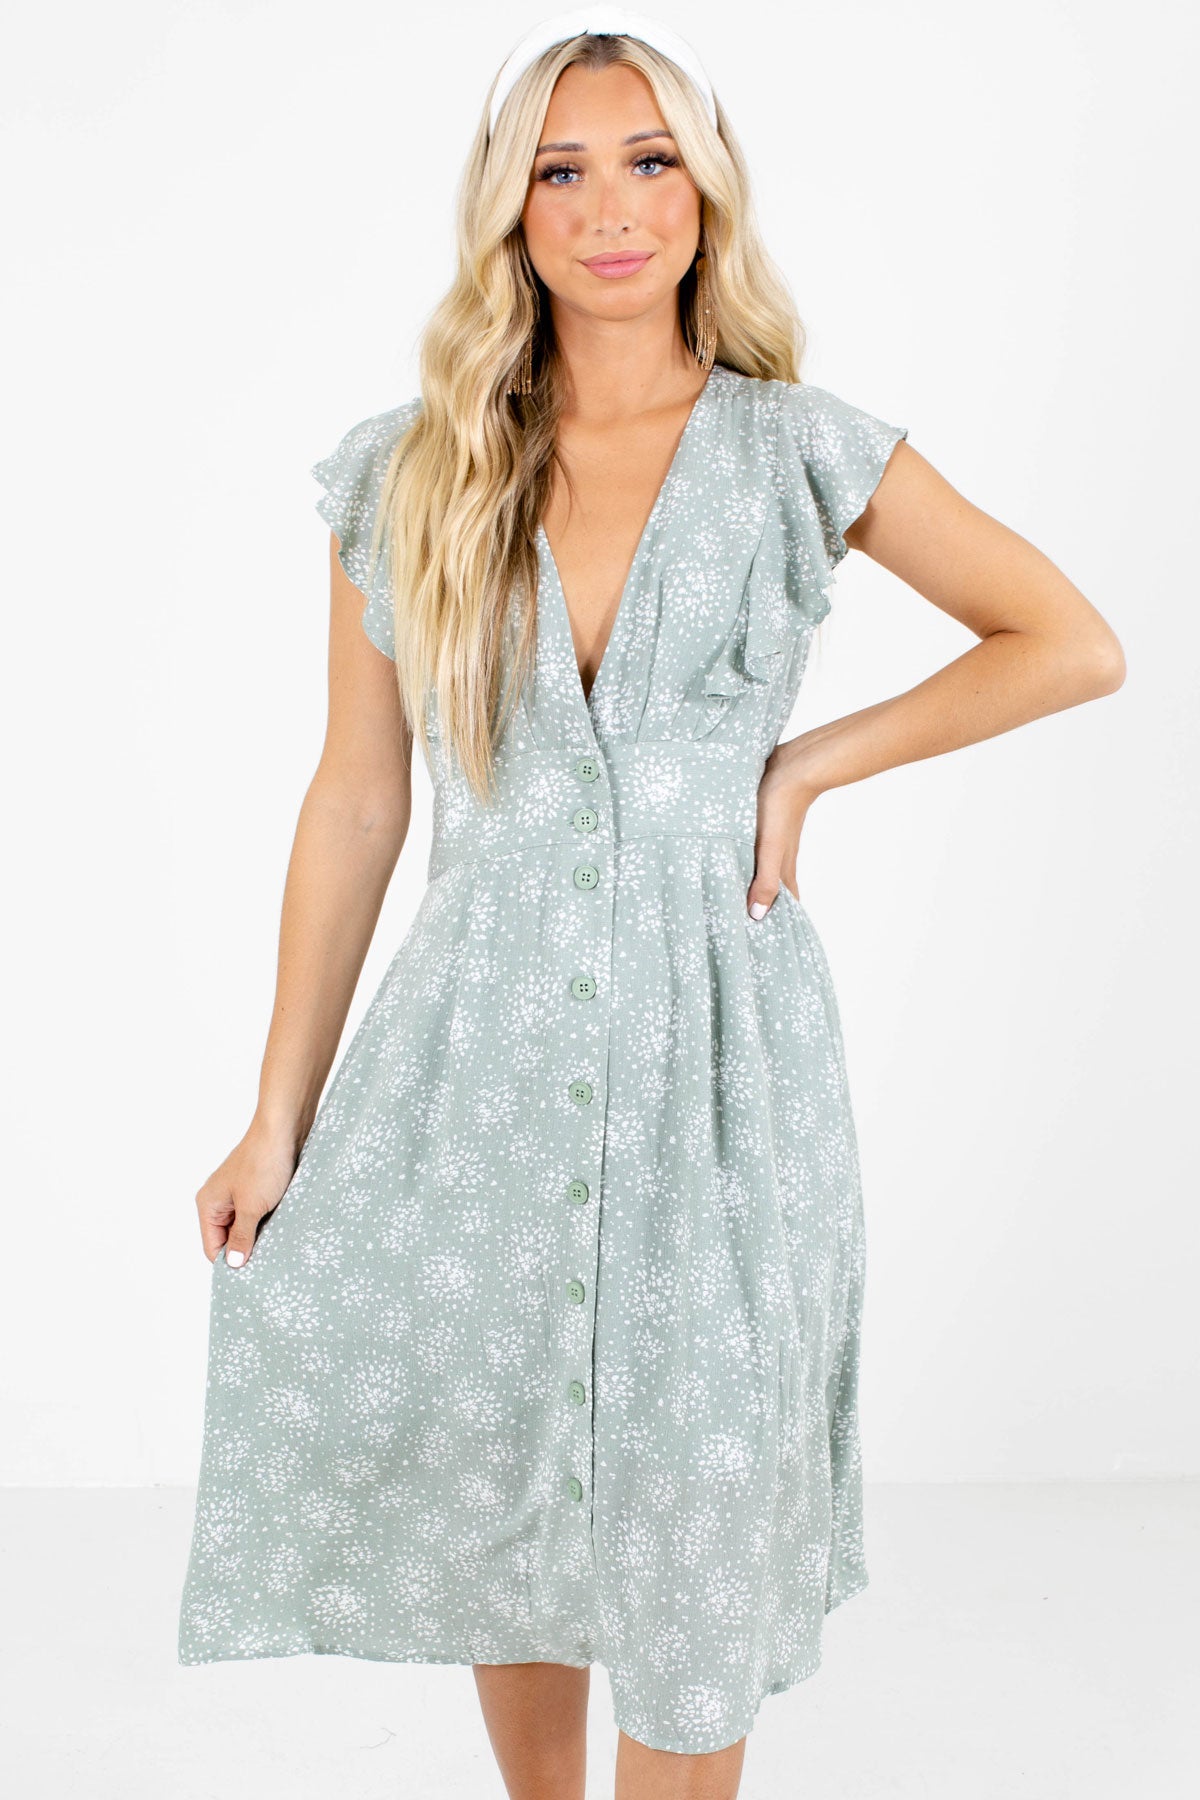 Sage and White Patterned Boutique Midi Dresses for Women